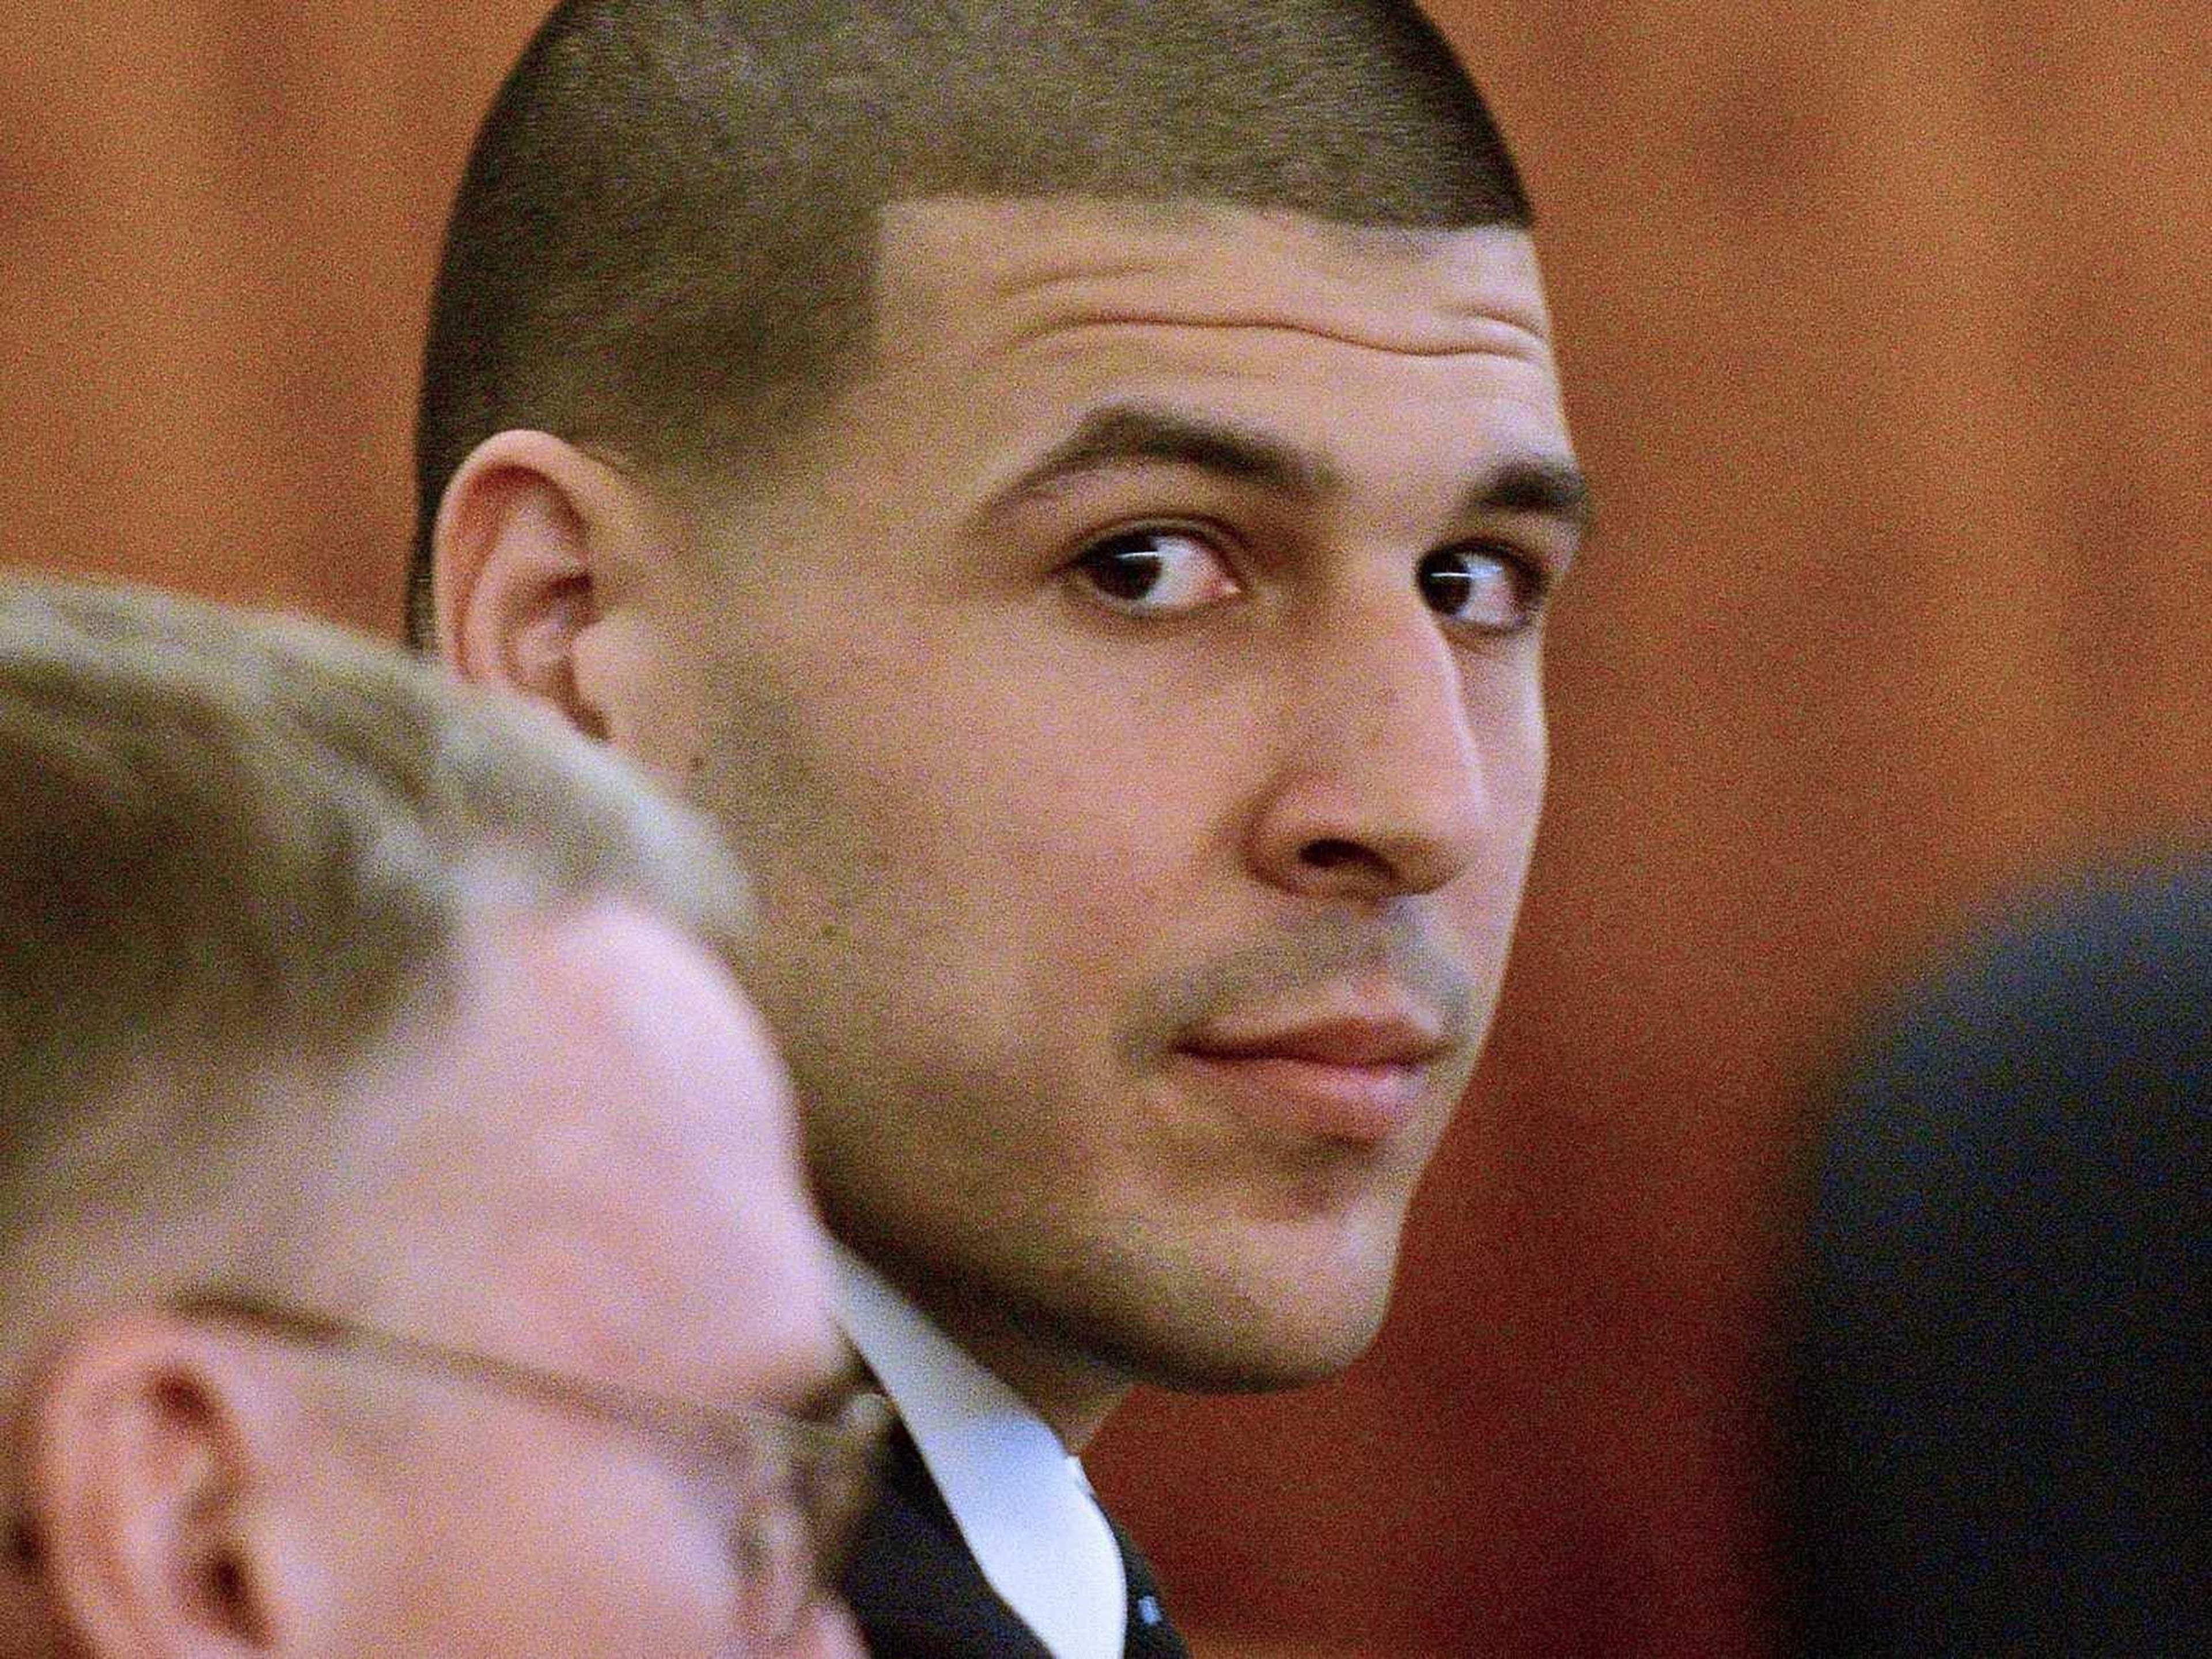 Former New England Patriots football player Aaron Hernandez looks toward the media area during his trial in Fall River, Mass., Monday, April 6, 2015.